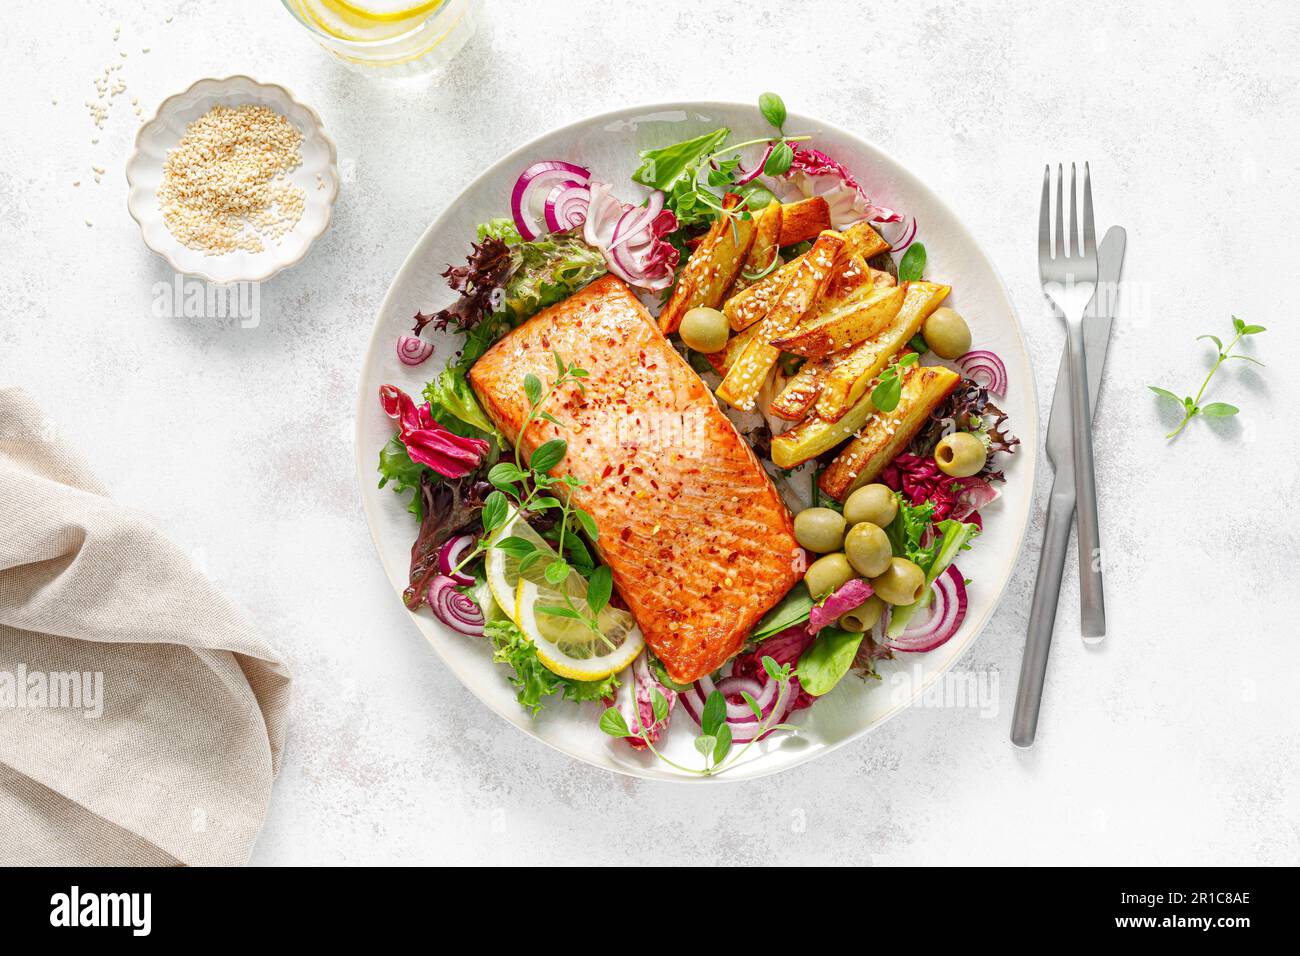 Salmon fillet grilled, fried potato and fresh vegetable green salad, top view Stock Photo